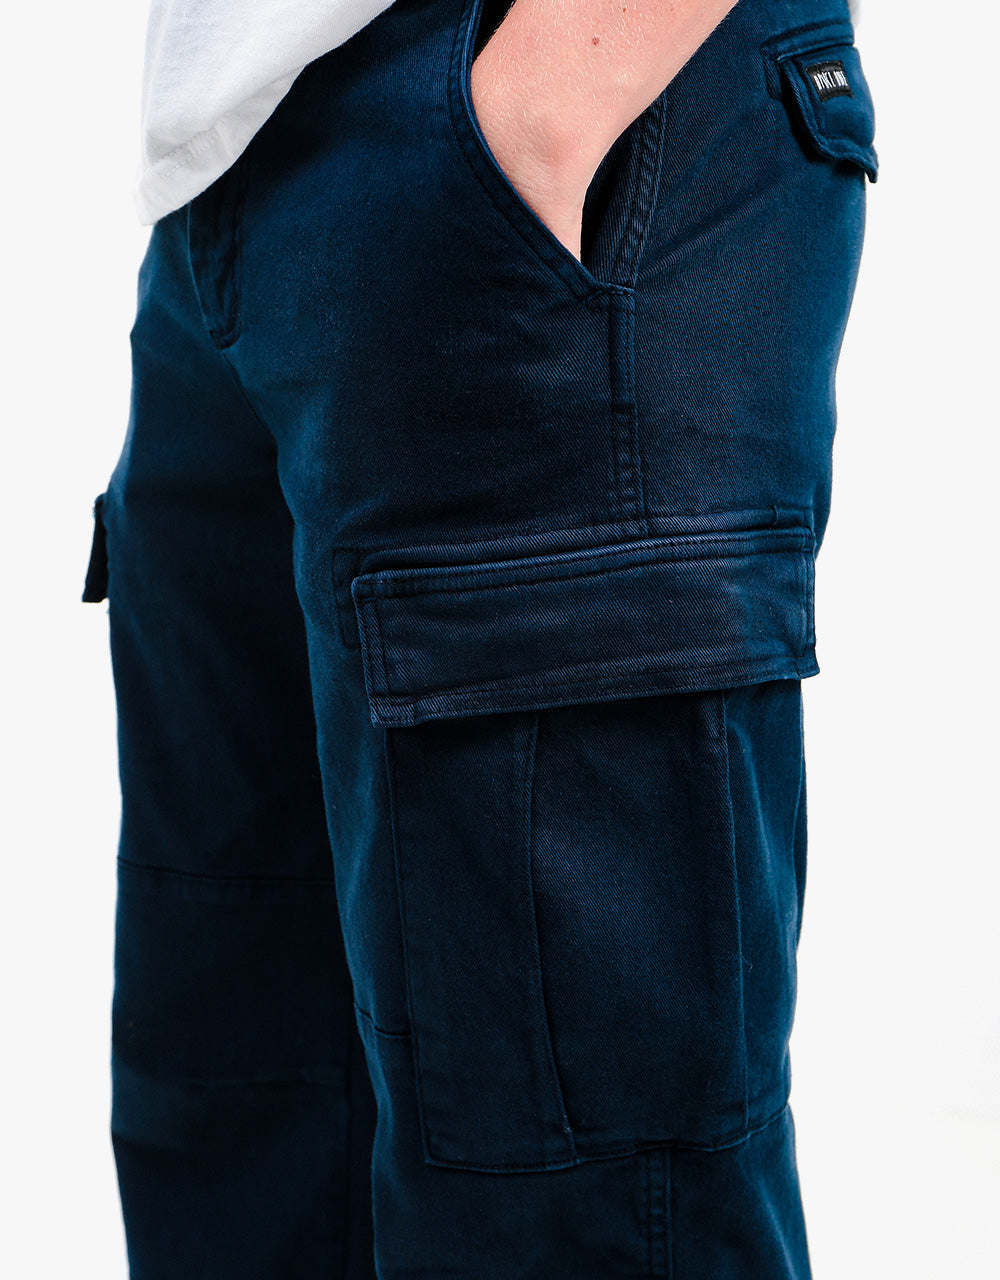 Route One Classic Cargo Pants - Navy